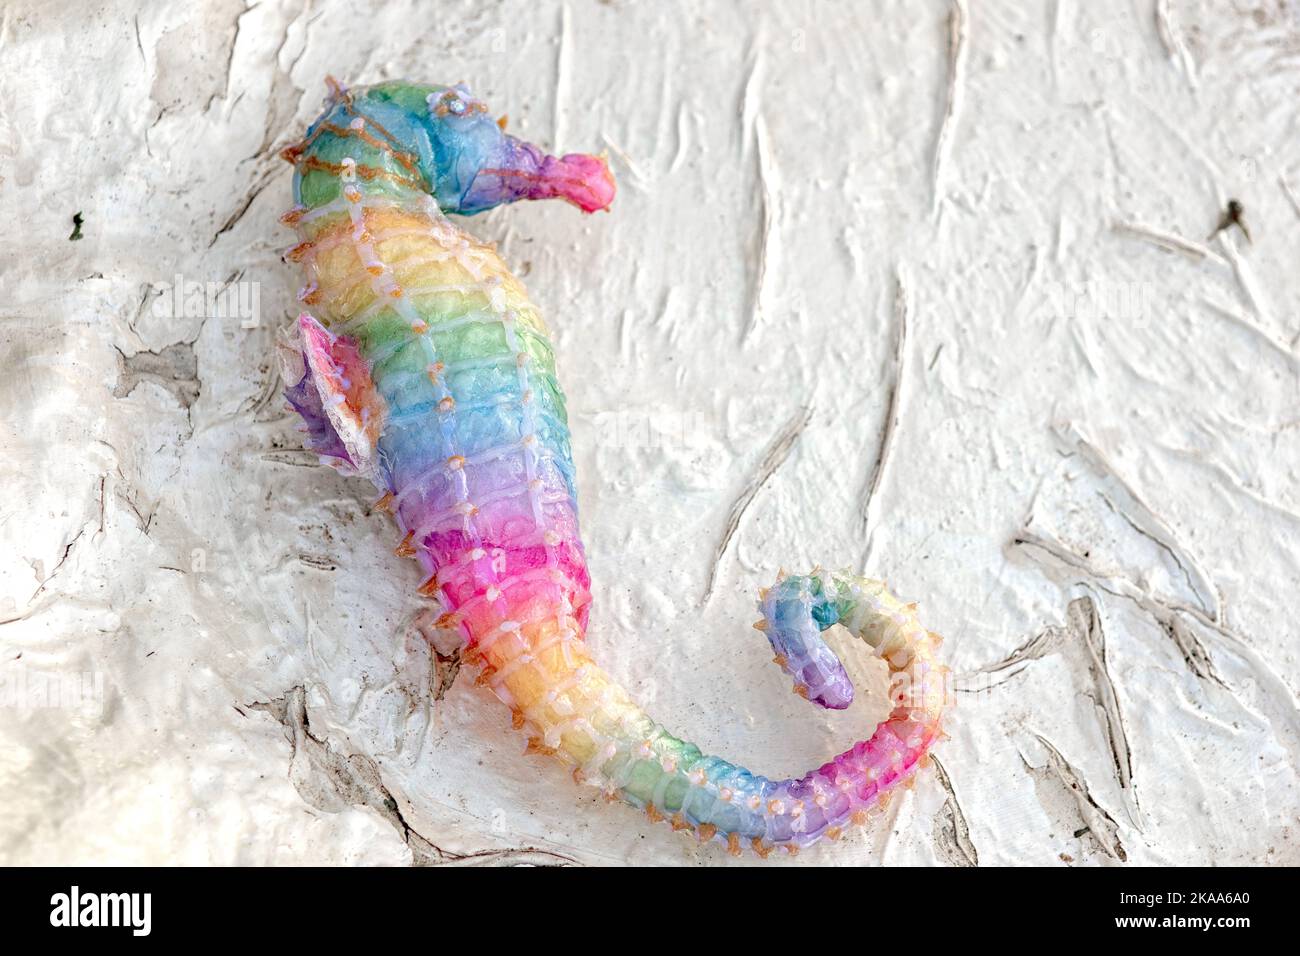 A figurine of a rainbow seahorse, lying on a white textured background Stock Photo